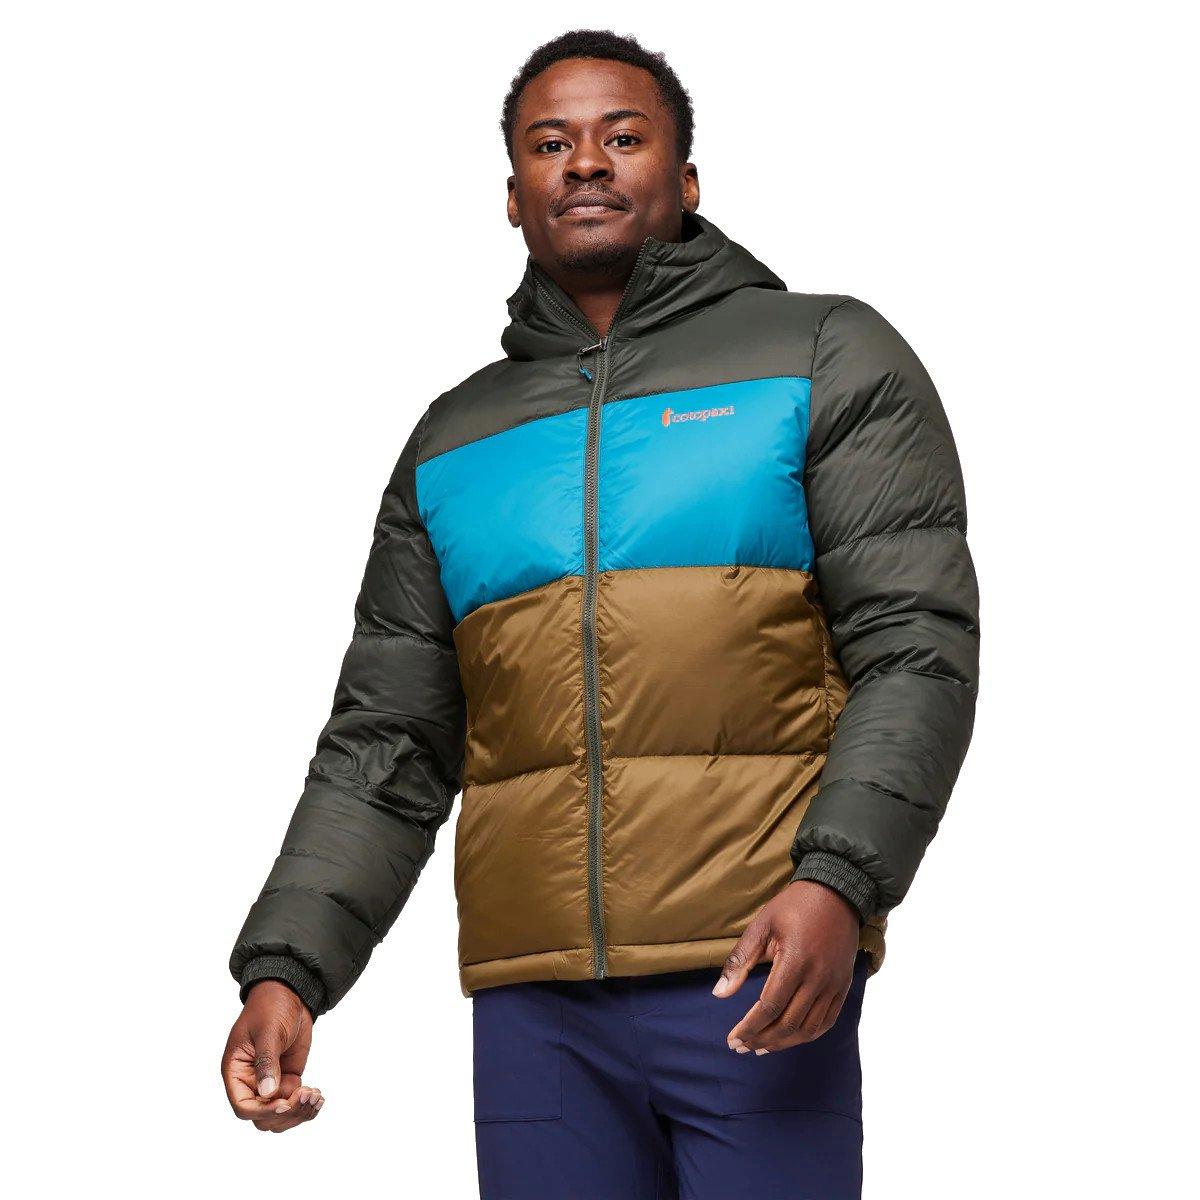 Cotopaxi Men's Solazo Down Hooded Jacket - Woods/Gulf